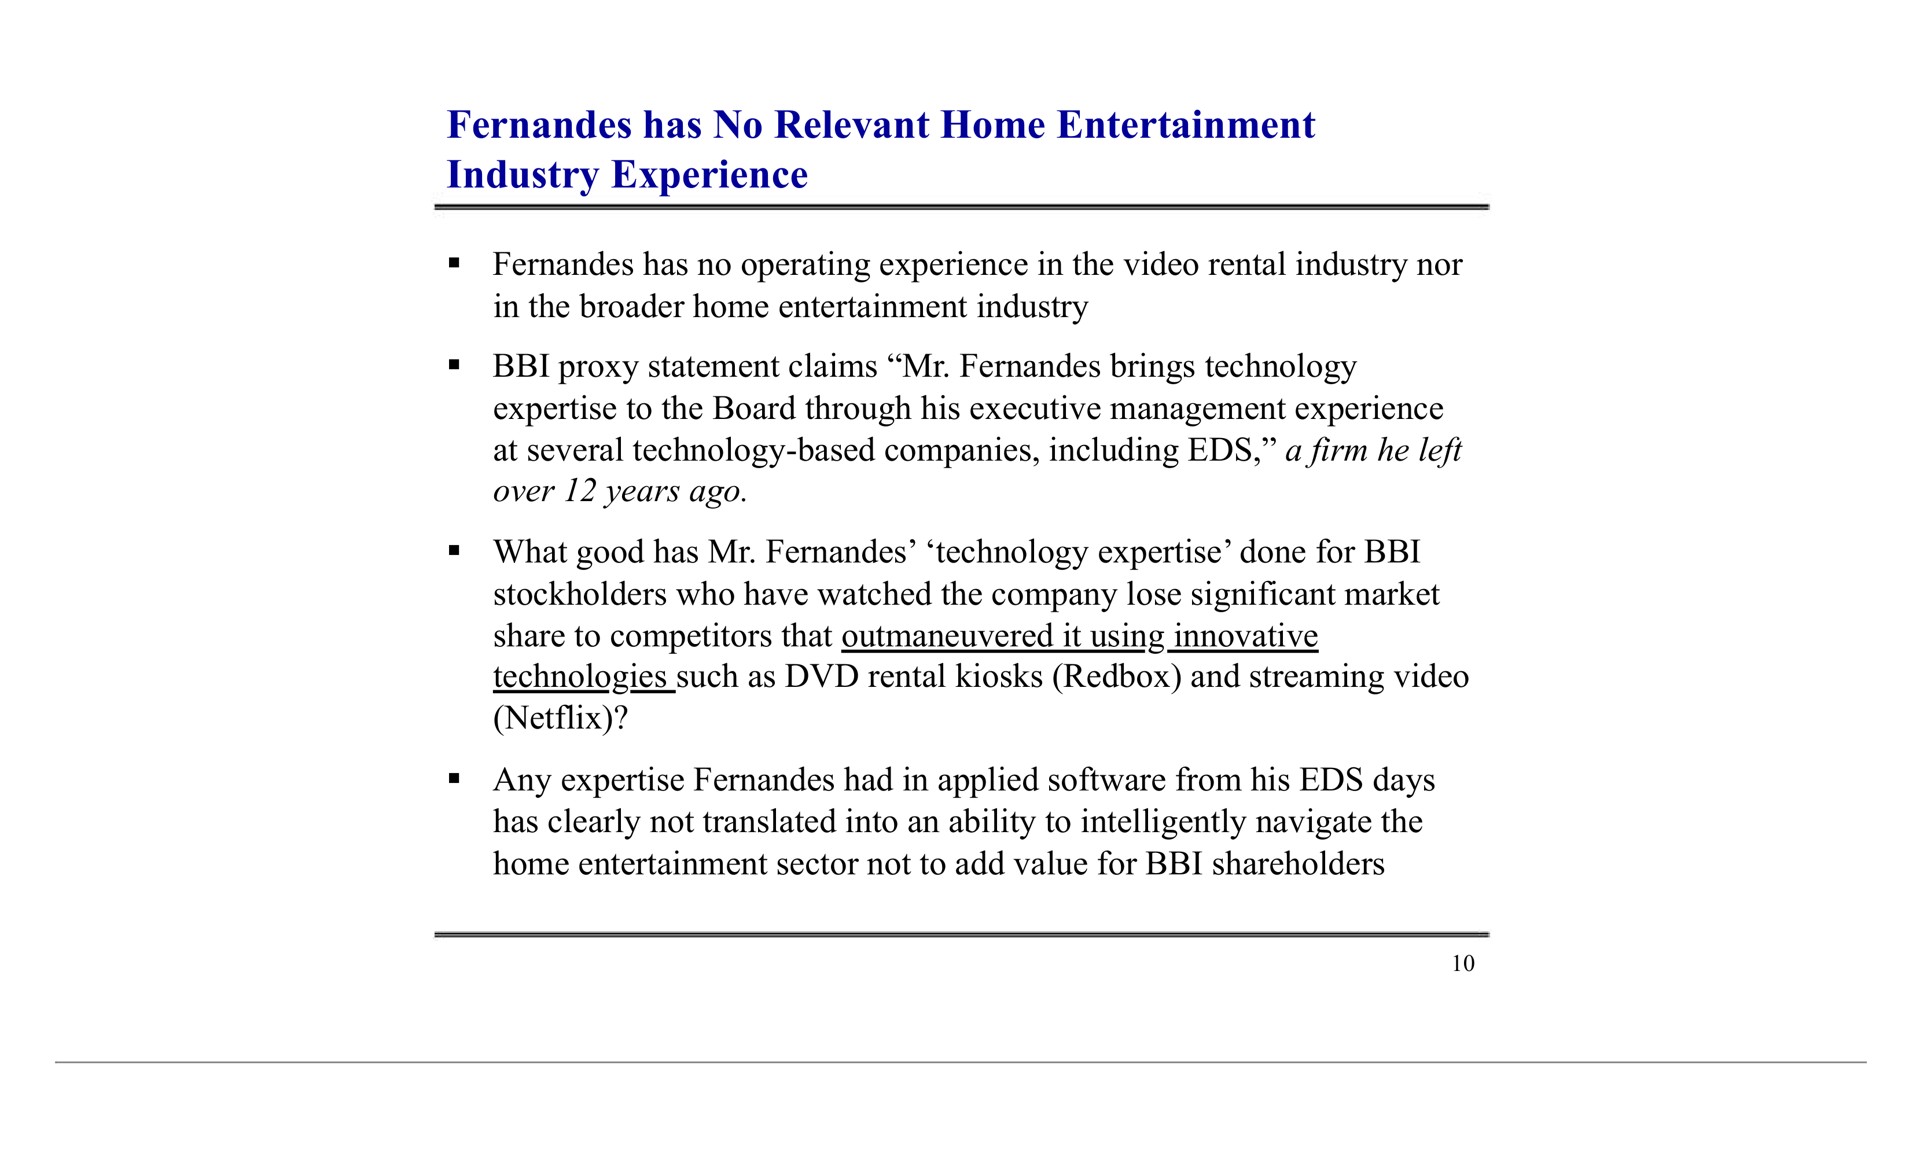 has no relevant home entertainment industry experience stockholders who have watched the company lose significant market technologies such as rental kiosks and streaming video any had in applied from his days clearly not translated into an ability to intelligently navigate the sector not to add value for shareholders | Blockbuster Video